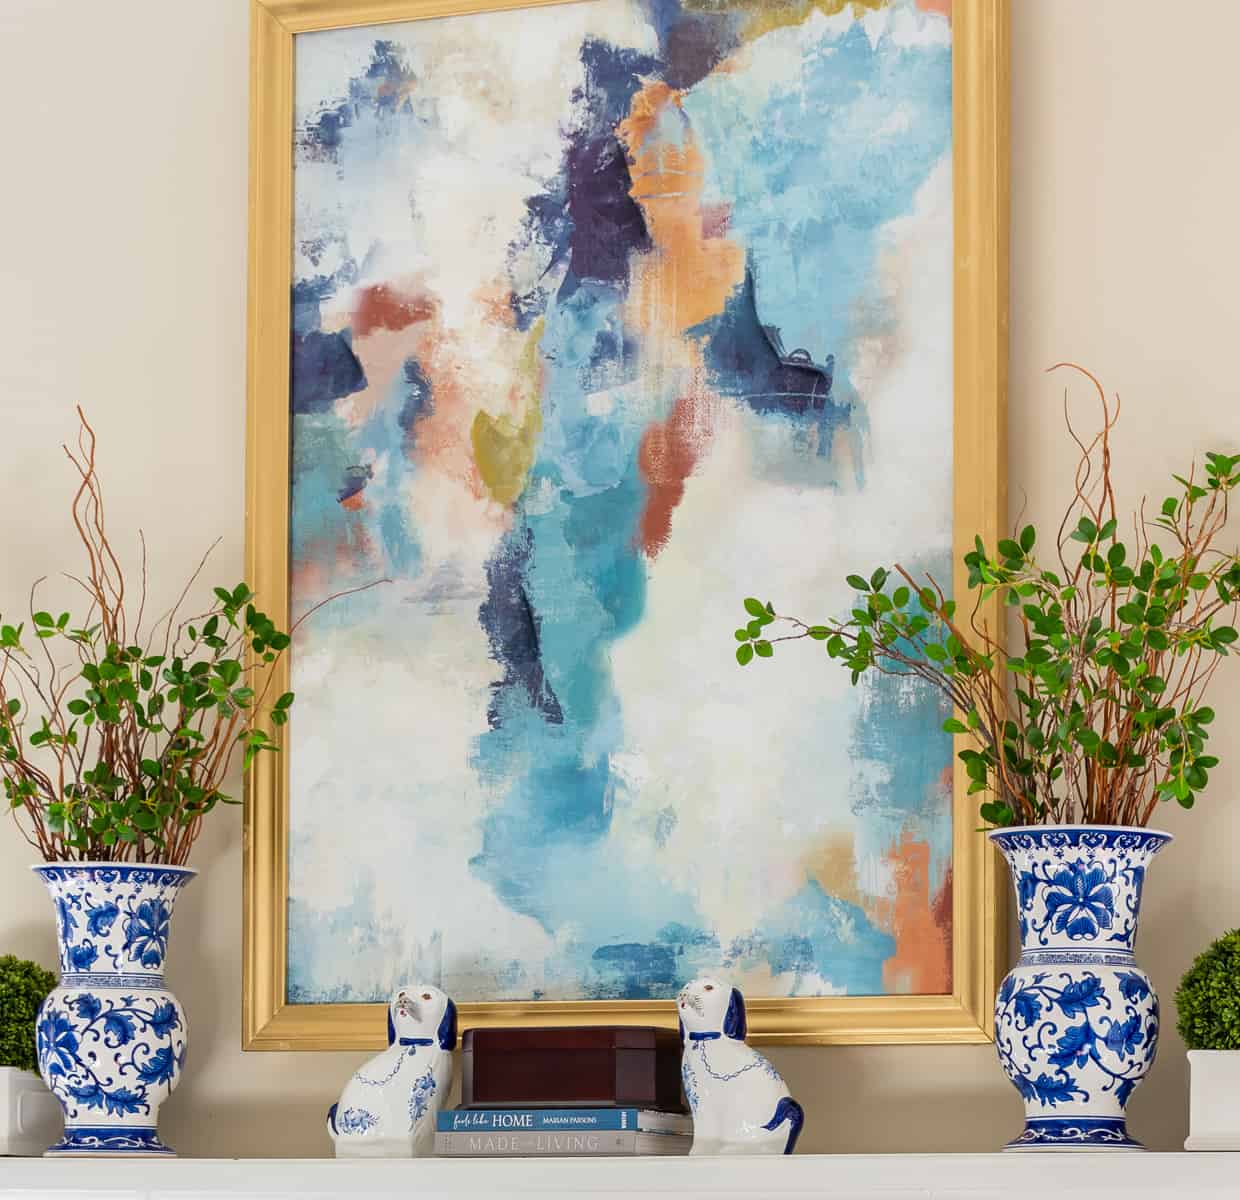 mantel with abstract art above and blue and white vases filled with stems on each end for winter decor